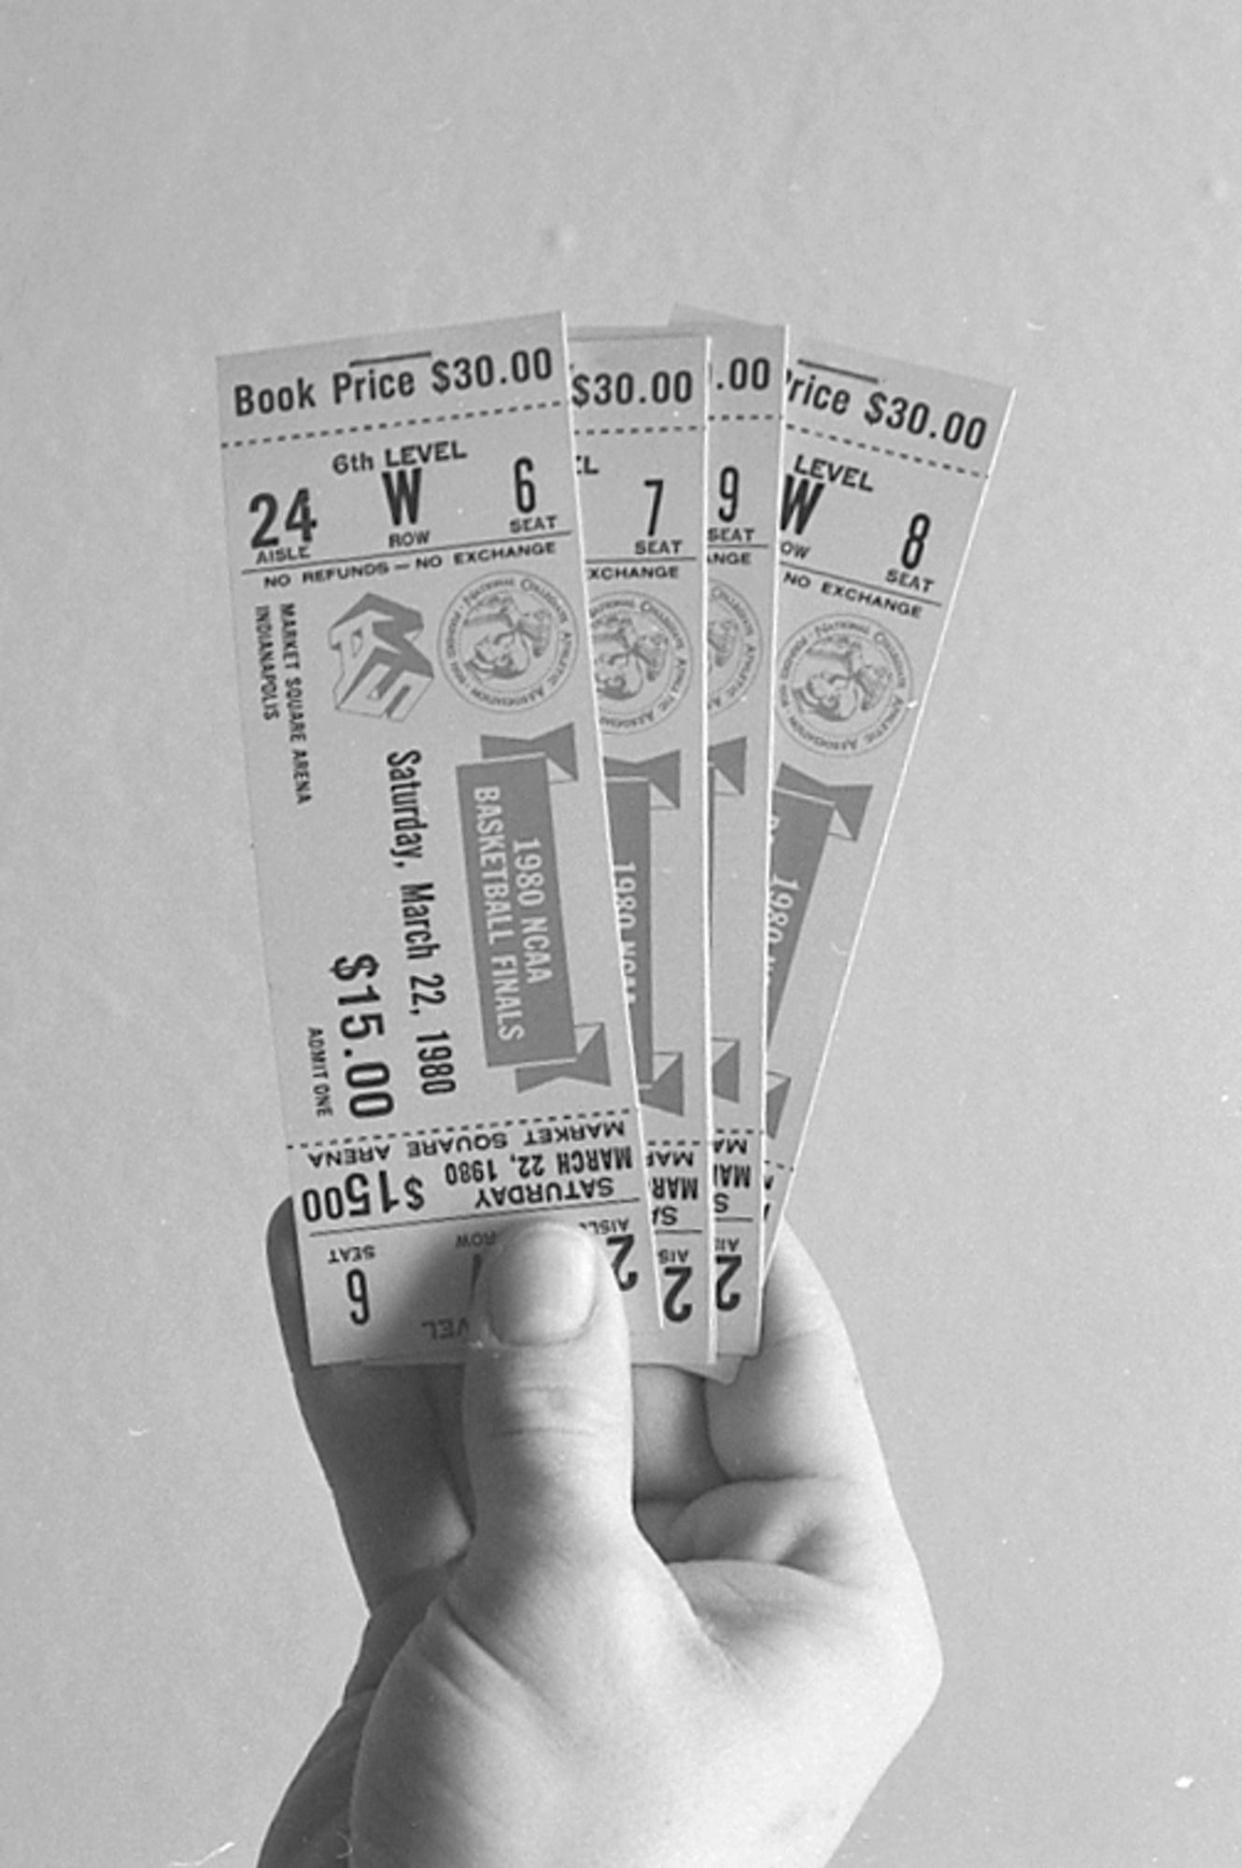 In this March 17, 1980, file photo, tickets to the NCAA Basketball Tournament Final Four at Market Square Arena in Indianapolis are held. Each ticket book cost $30, $15 per game.
(Credit: Journal & Courier Archives)